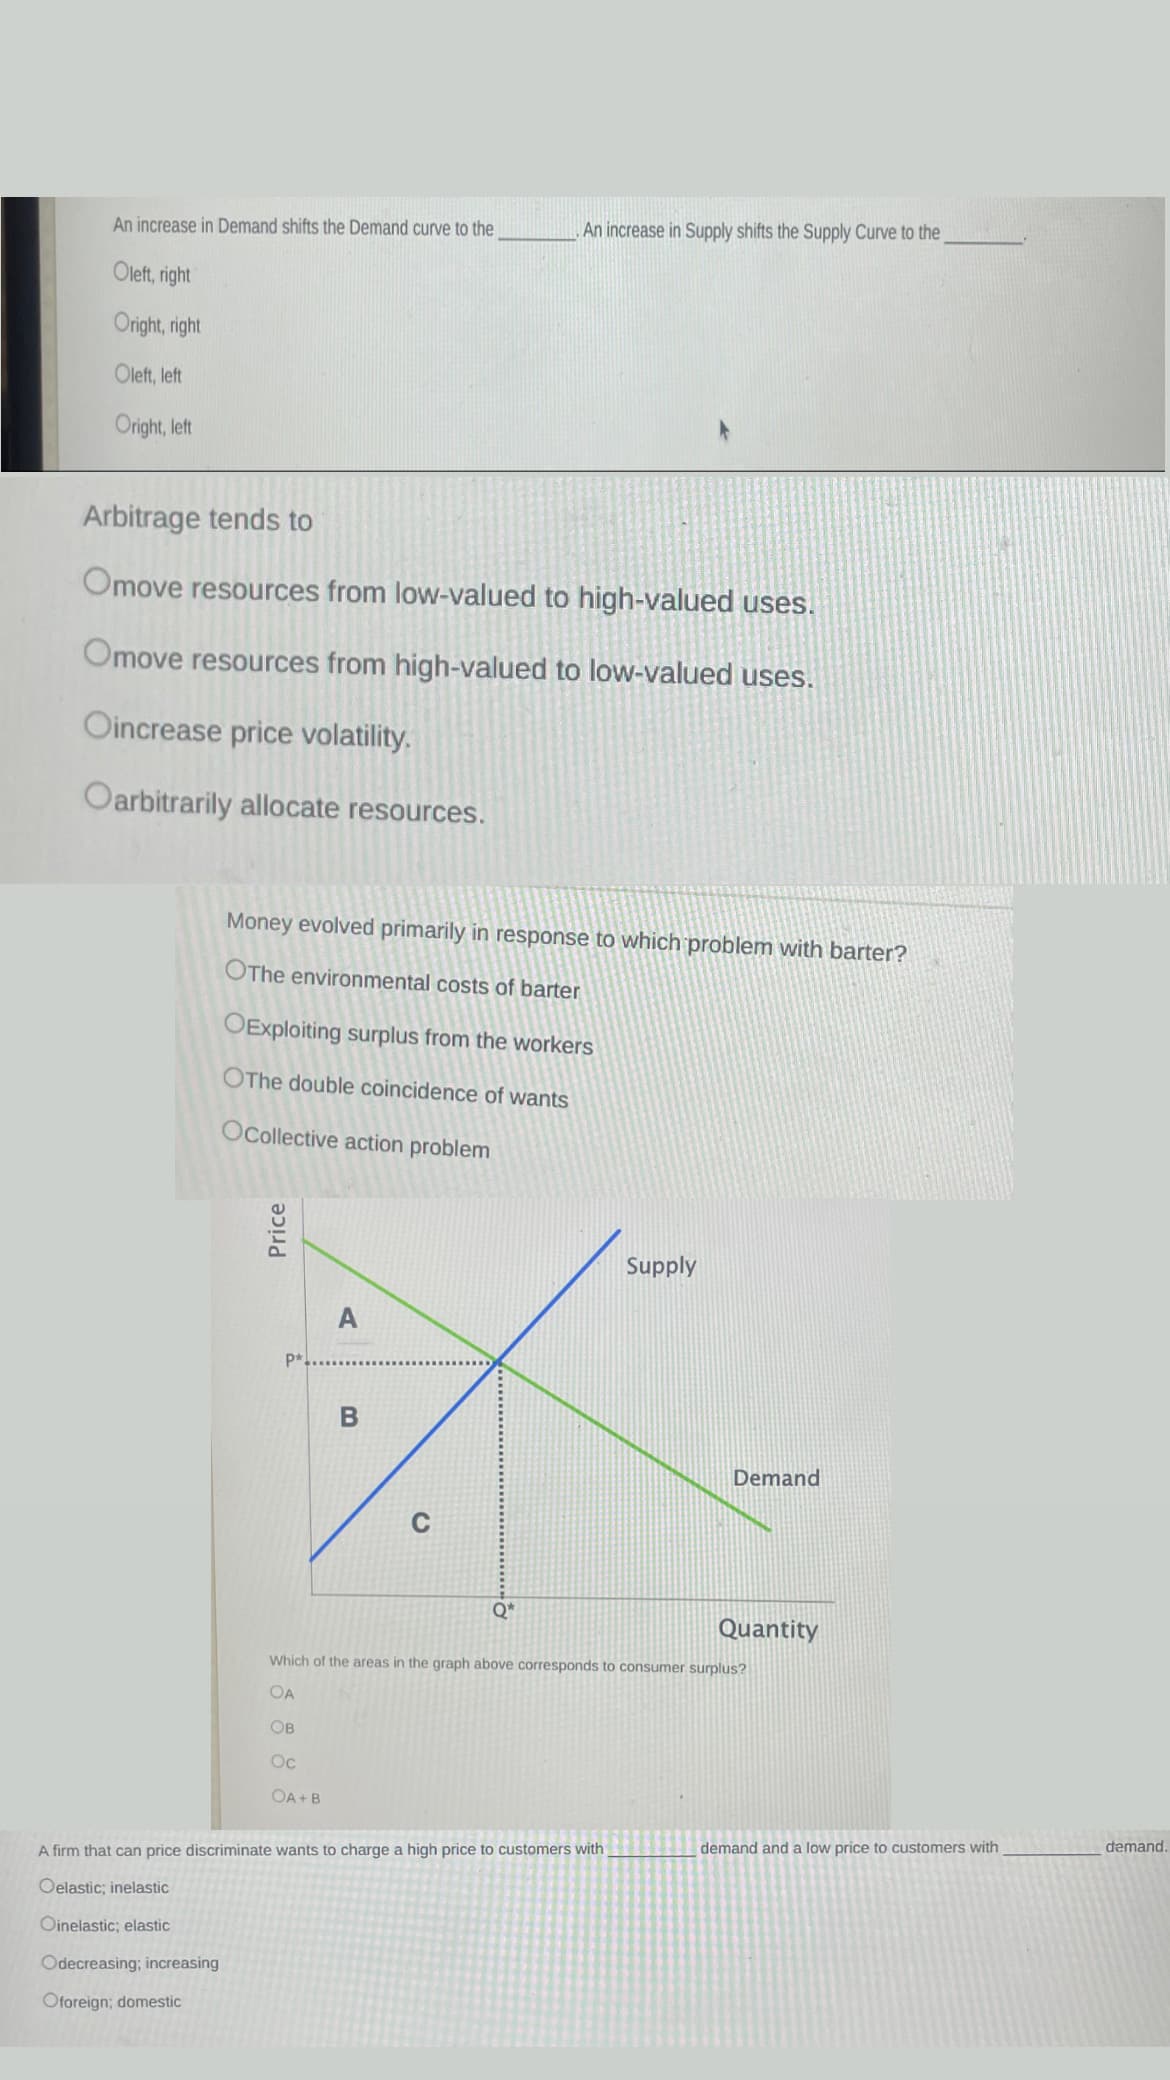 An increase in Demand shifts the Demand curve to the
Oleft, right
Oright, right
Oleft, left
Oright, left
Arbitrage tends to
Omove resources from low-valued to high-valued uses.
Omove resources from high-valued to low-valued uses.
Oincrease price volatility.
Oarbitrarily allocate resources.
Money evolved primarily in response to which problem with barter?
OThe environmental costs of barter
OExploiting surplus from the workers
OThe double coincidence of wants
Ocollective action problem
Price
P*
A
An increase in Supply shifts the Supply Curve to the
B
Q*
Supply
A firm that can price discriminate wants to charge a high price to customers with
Oelastic; inelastic
Oinelastic; elastic
Odecreasing; increasing
Oforeign; domestic
Demand
Quantity
Which of the areas in the graph above corresponds to consumer surplus?
OA
OB
Oc
OA+B
demand and a low price to customers with
demand.